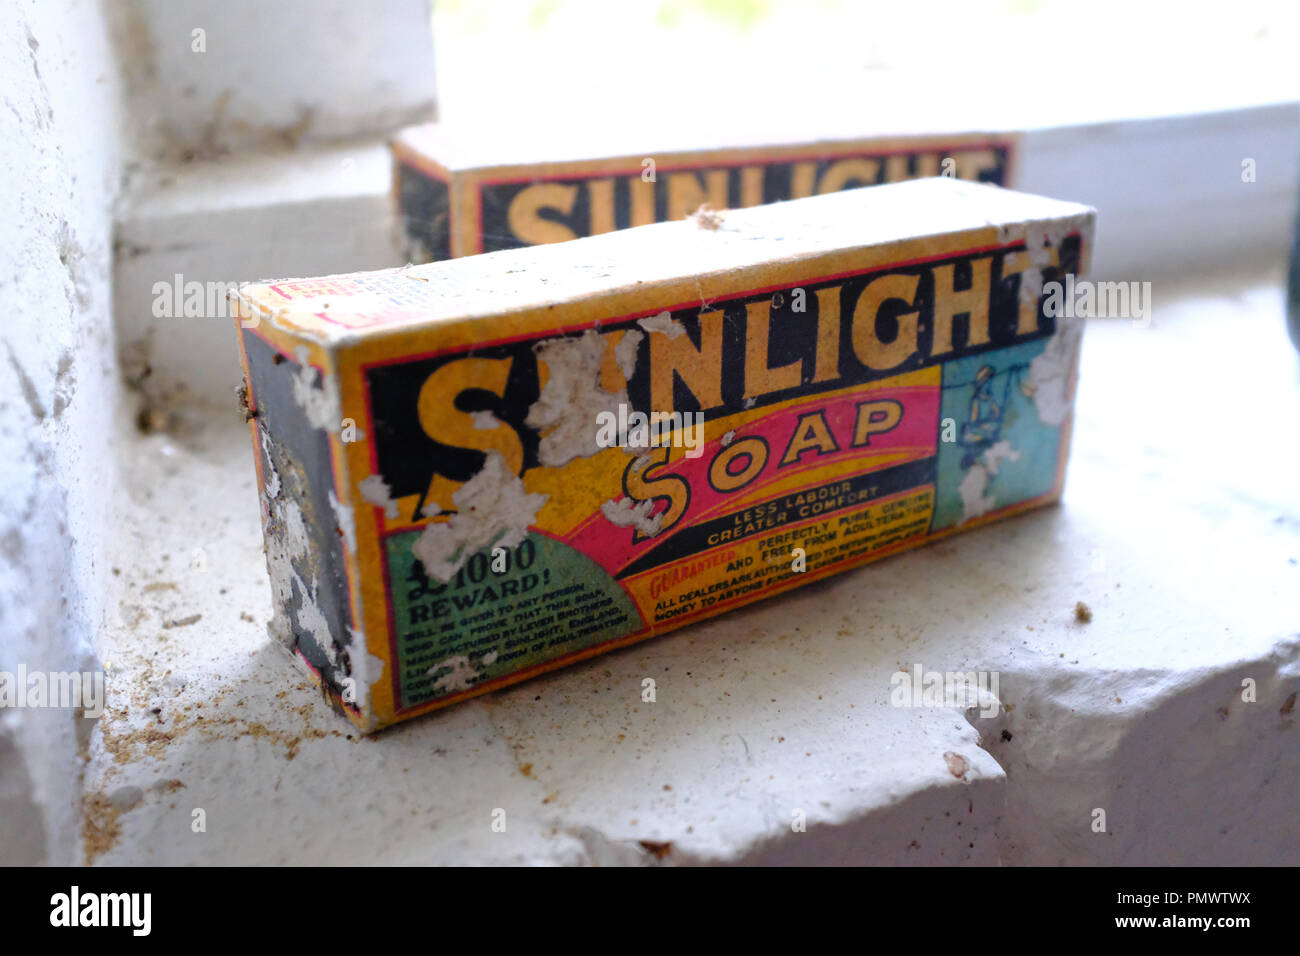 Sunlight soap in the Wash house at Ryedale Folk Museum, Hutton le Hole, Yorkshire, UK Stock Photo